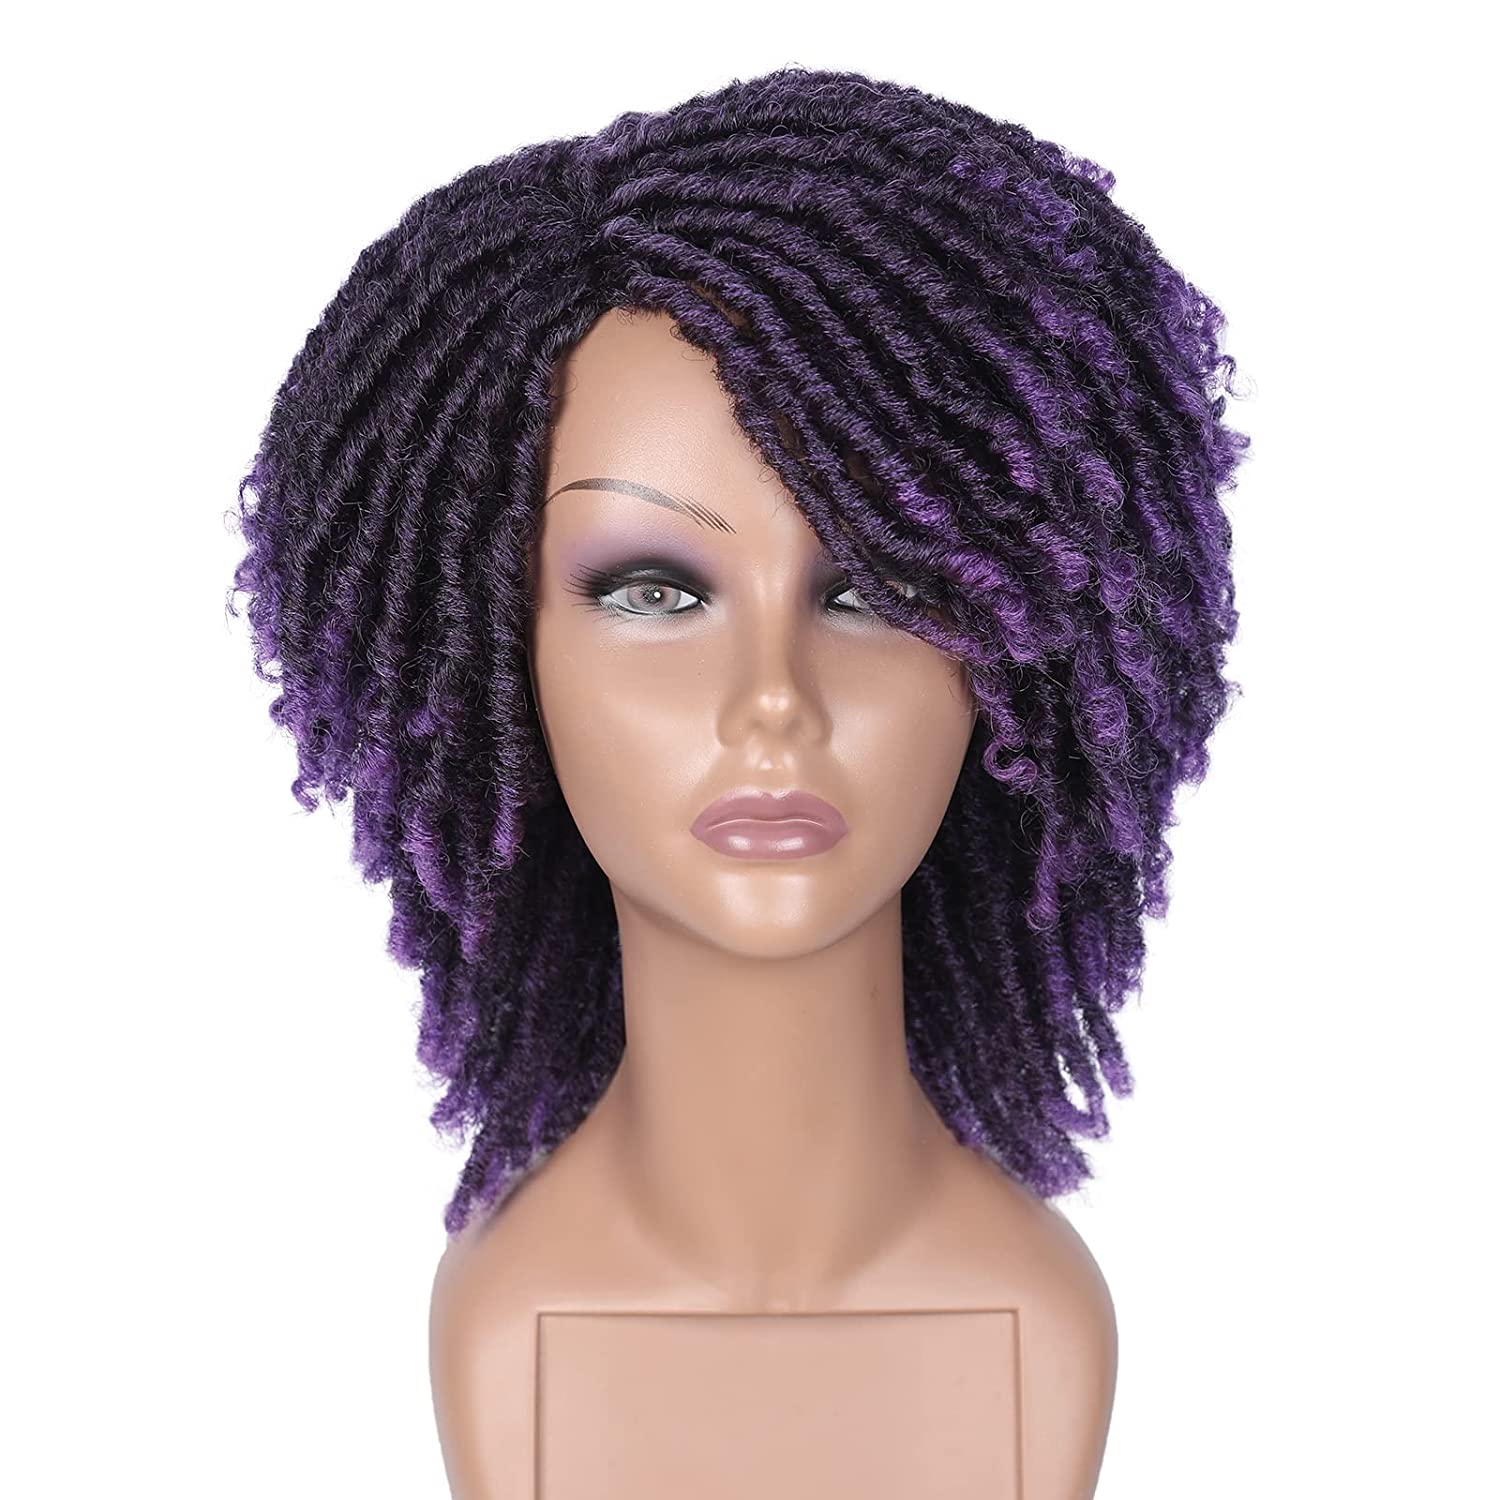 purple dreadslocks  Our Dreadlock Wig Short Twist Wig is perfect for a natural, stylish look. This lightweight wig features a beautiful twist style and is made of premium heat resistant synthetic fibers. The breathable cap provides superior comfort and an adjustable strap ensures a secure fit. Our Dreadlock Wig Short Twist Wig is perfect for any occasion.